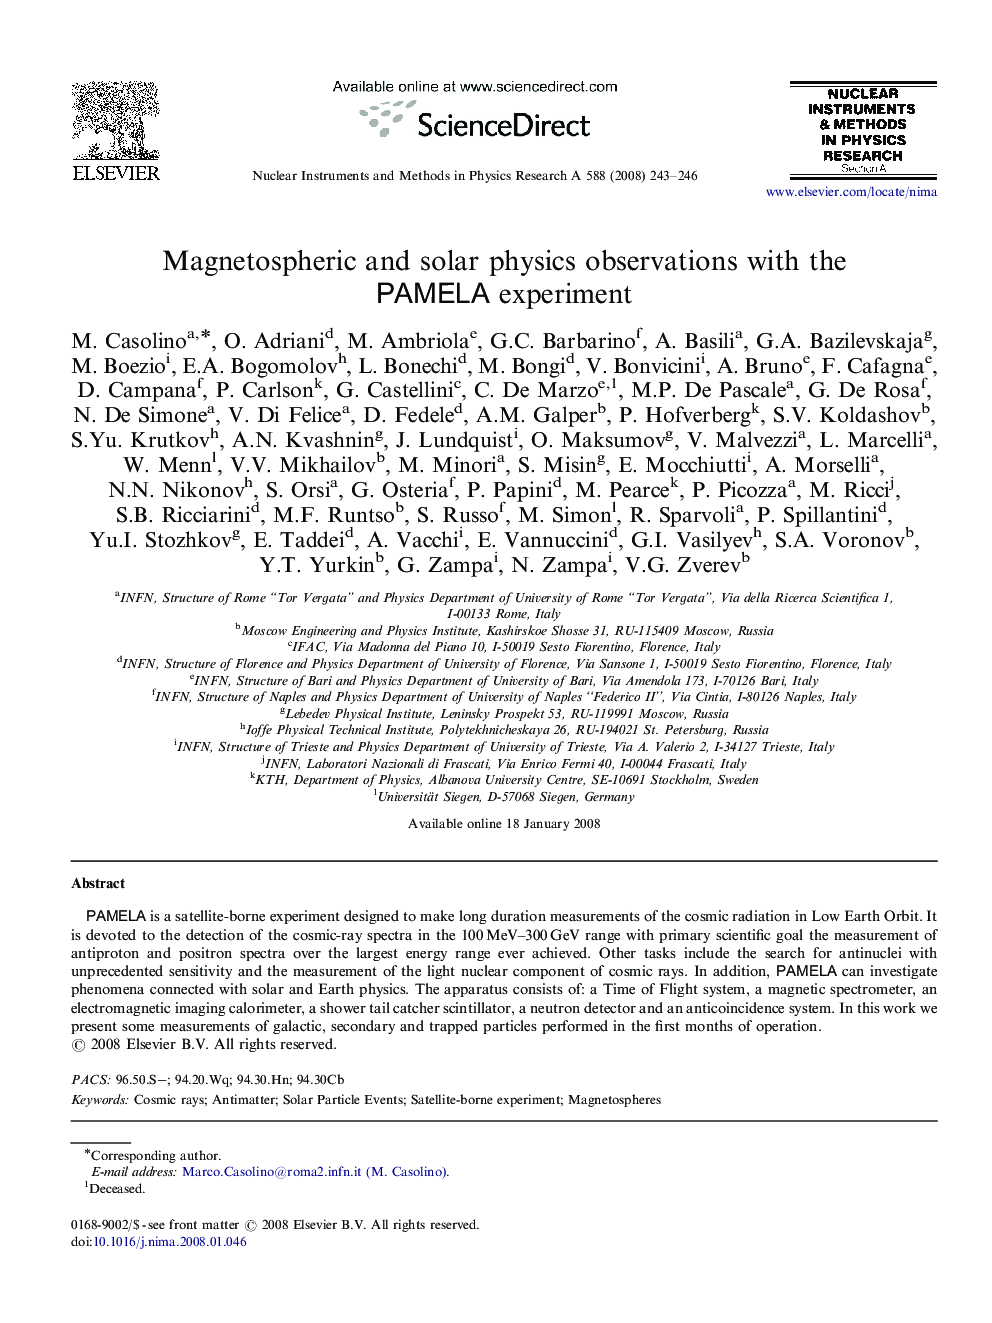 Magnetospheric and solar physics observations with the PAMELA experiment